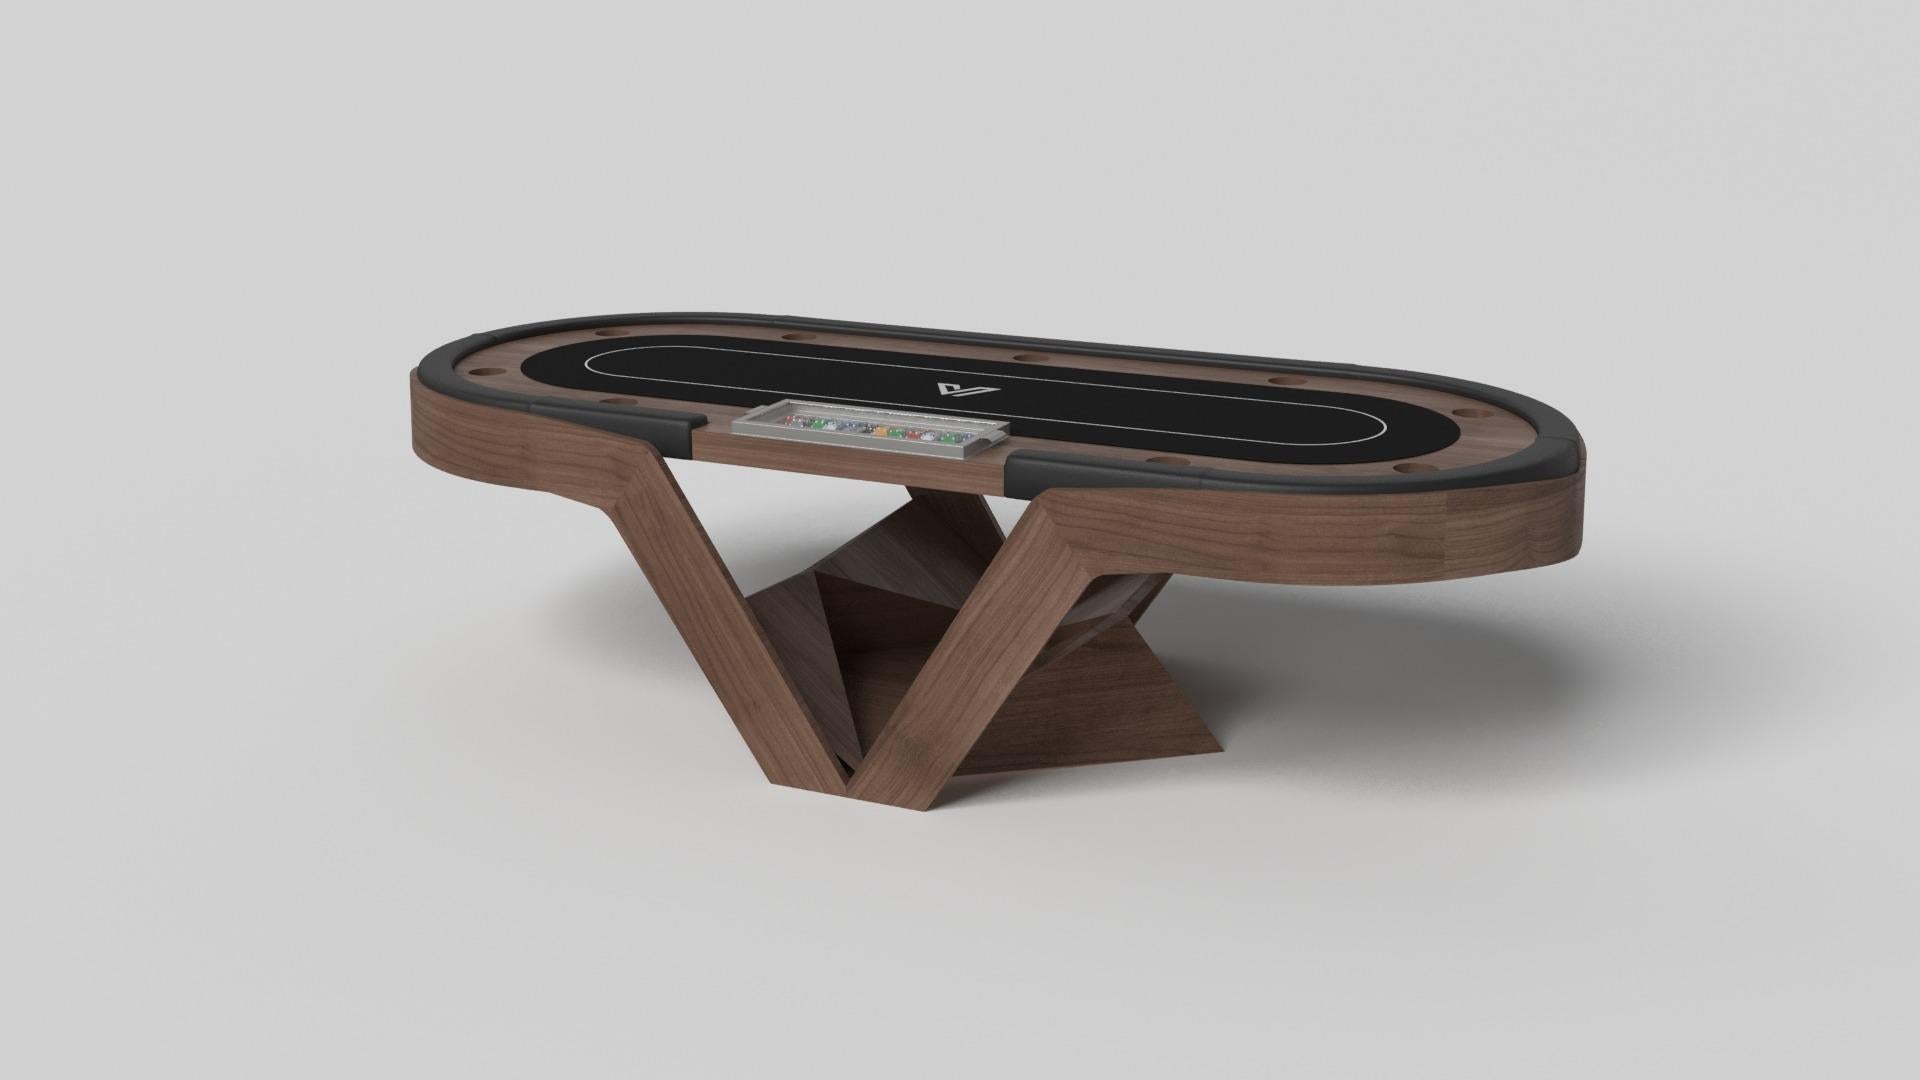 The Enzo poker table is Inspired by the aerodynamic angles of top-of-the-line European vehicles. Designed with sleek, V-shaped lines and a thoughtful use of negative space, this table boasts an energetic sense of spirit while epitomizing the look of